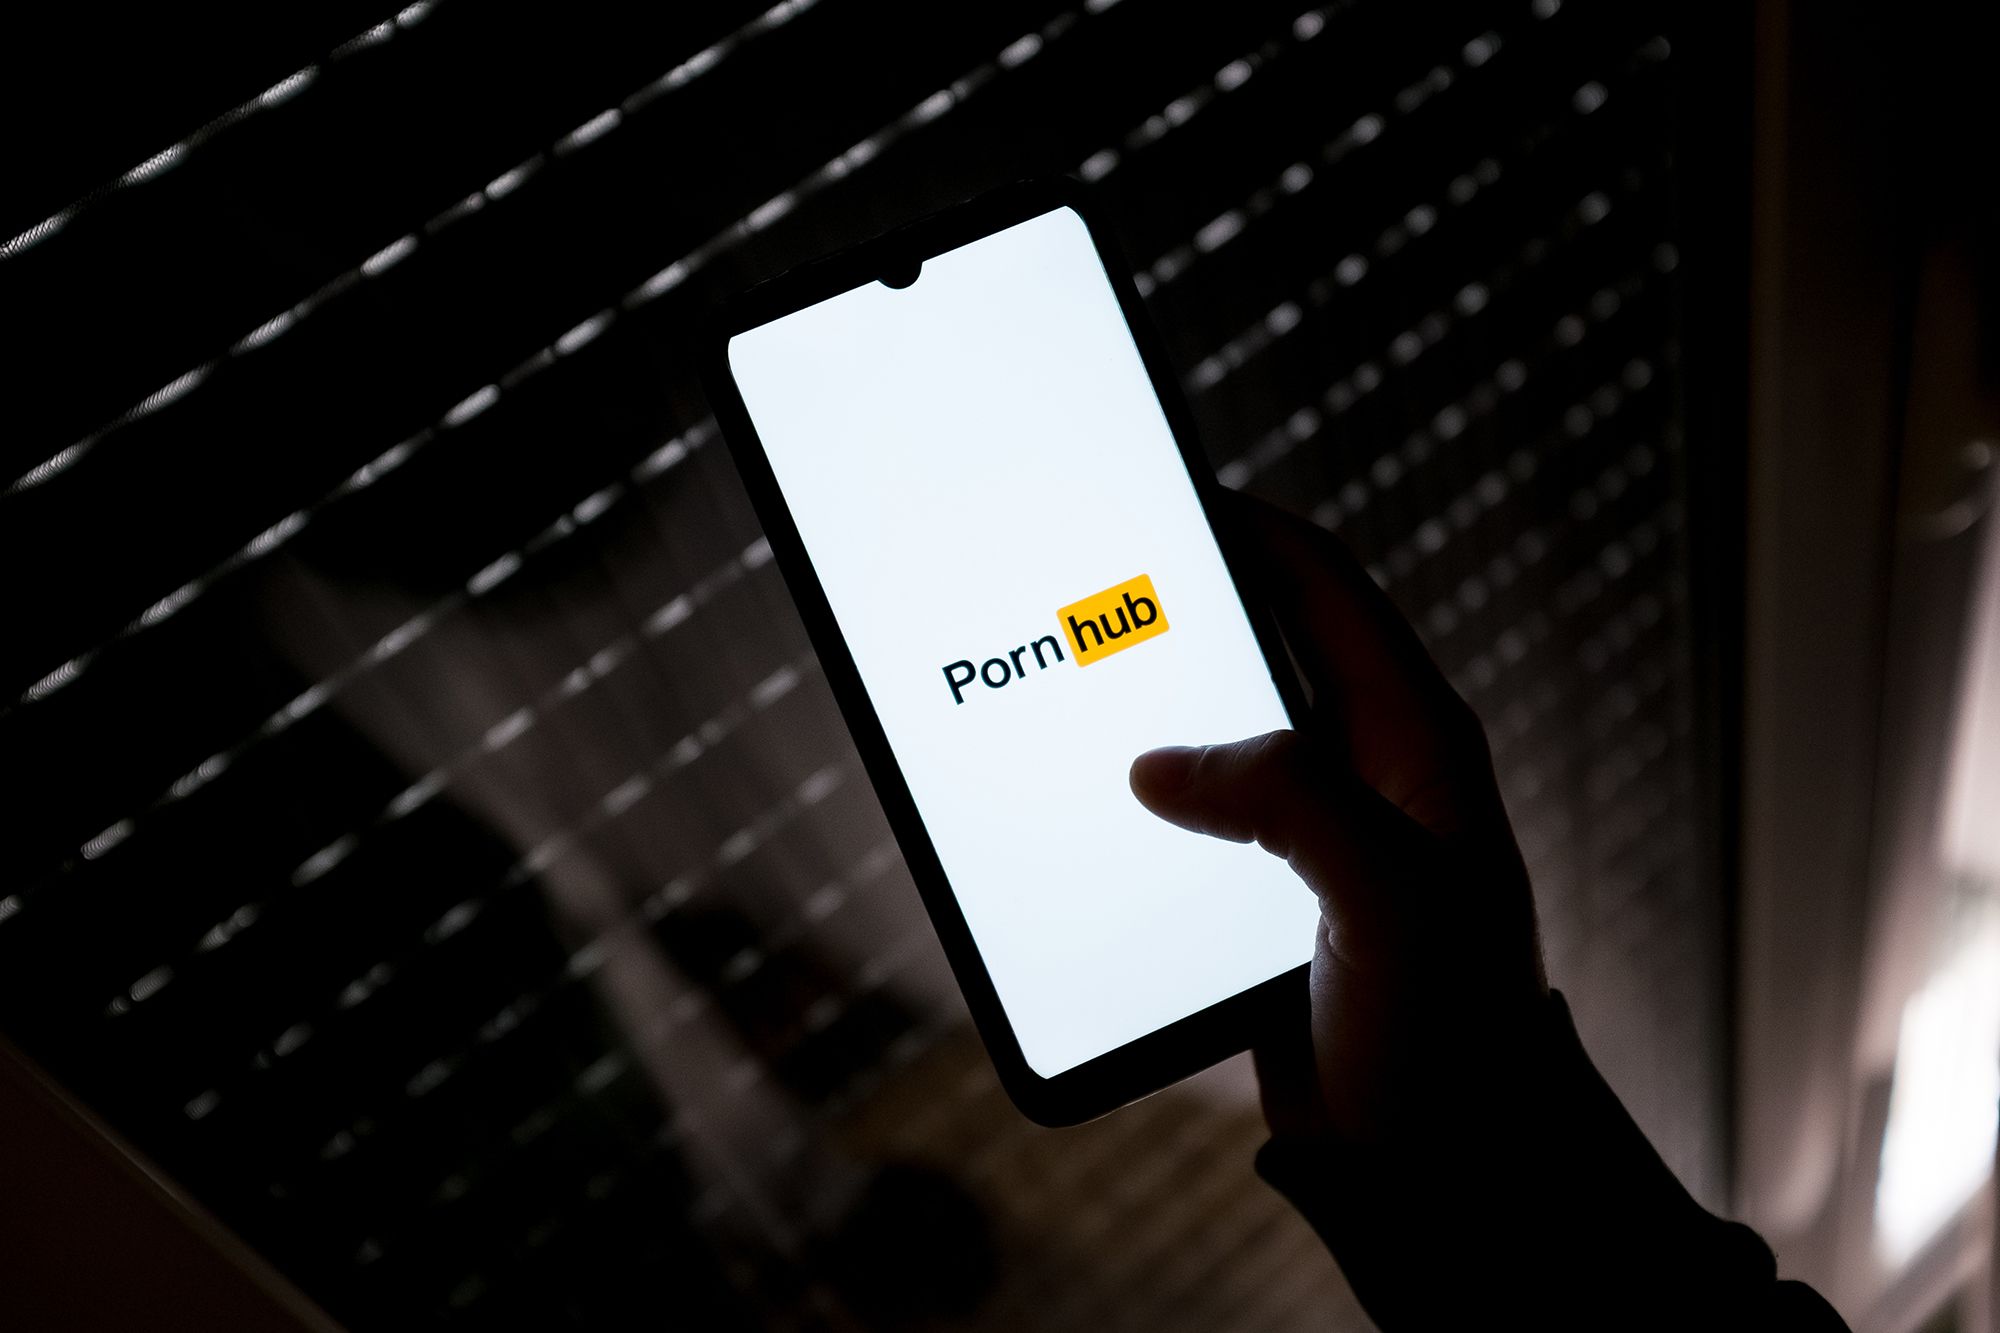 Hindi Audio Chachi Sleeping - Pornhub asks users, Big Tech for help as states adopt age verification laws  | CNN Business